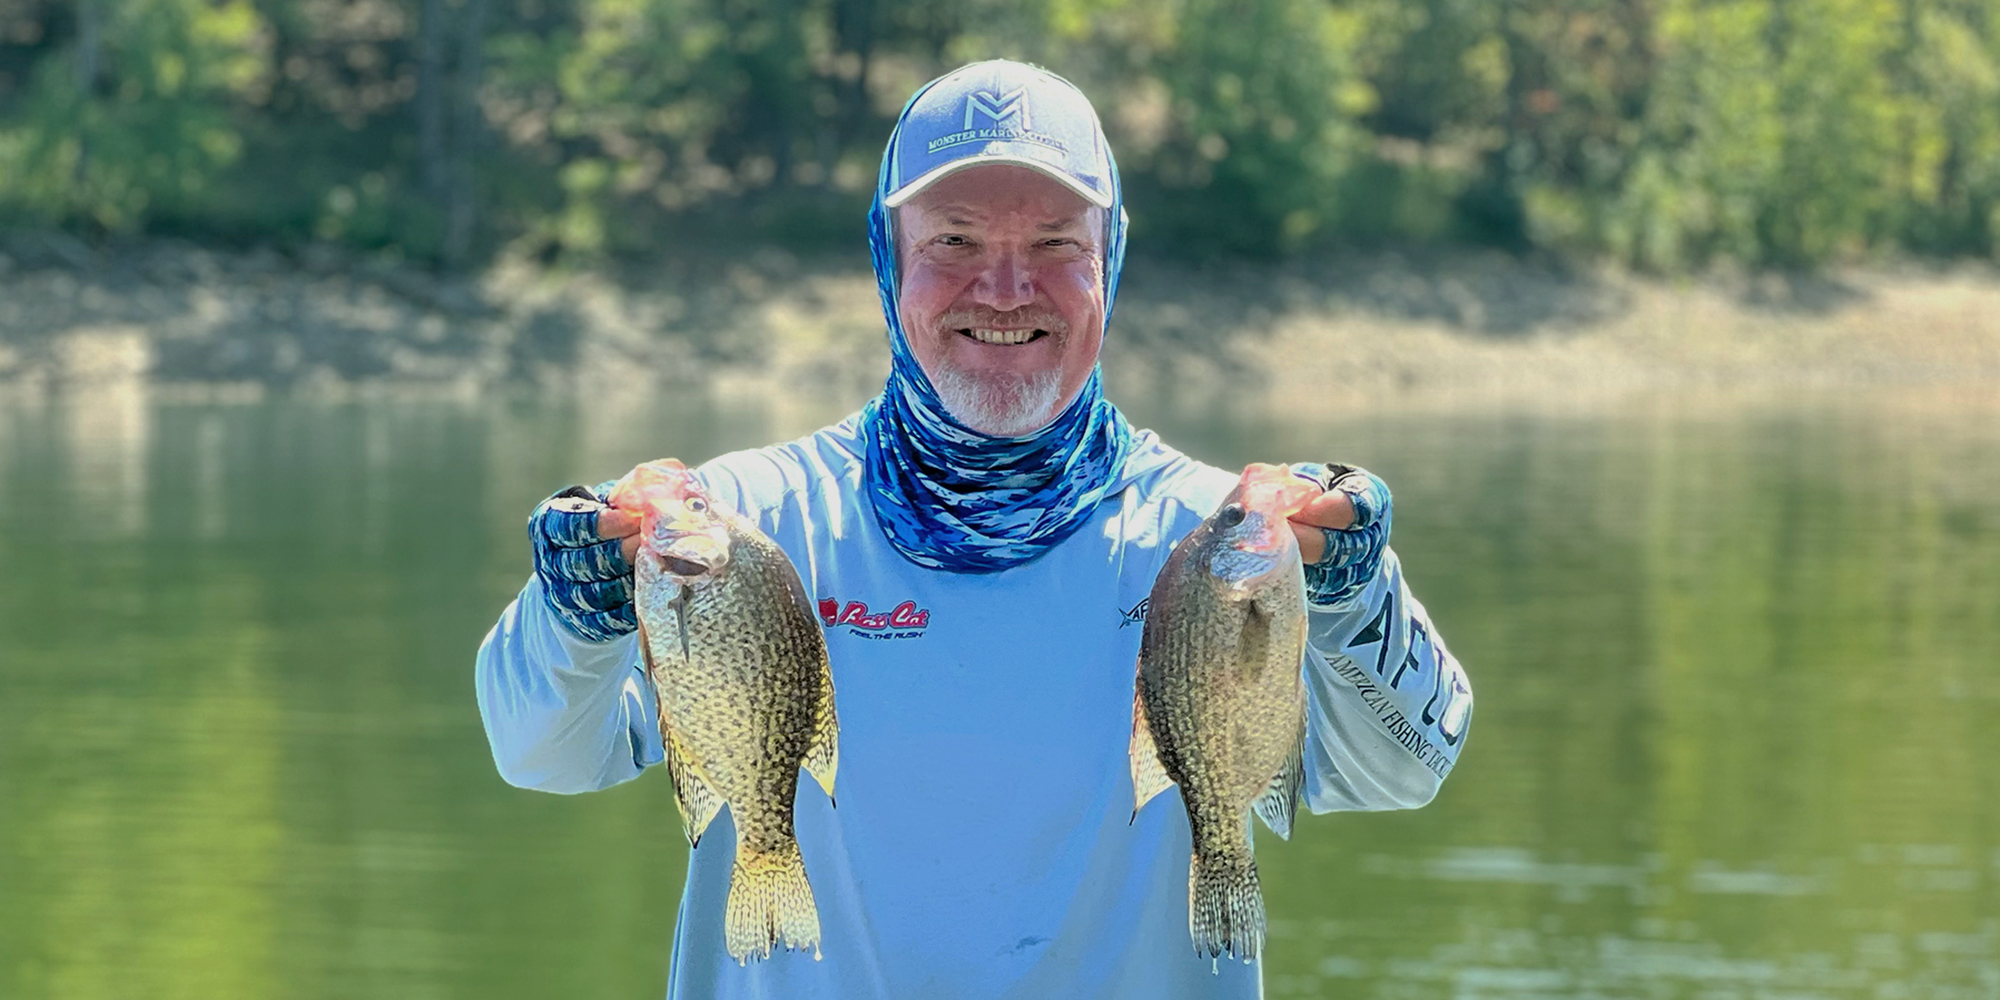 Davis shares guide tips for catching fall crappie - Major League Fishing